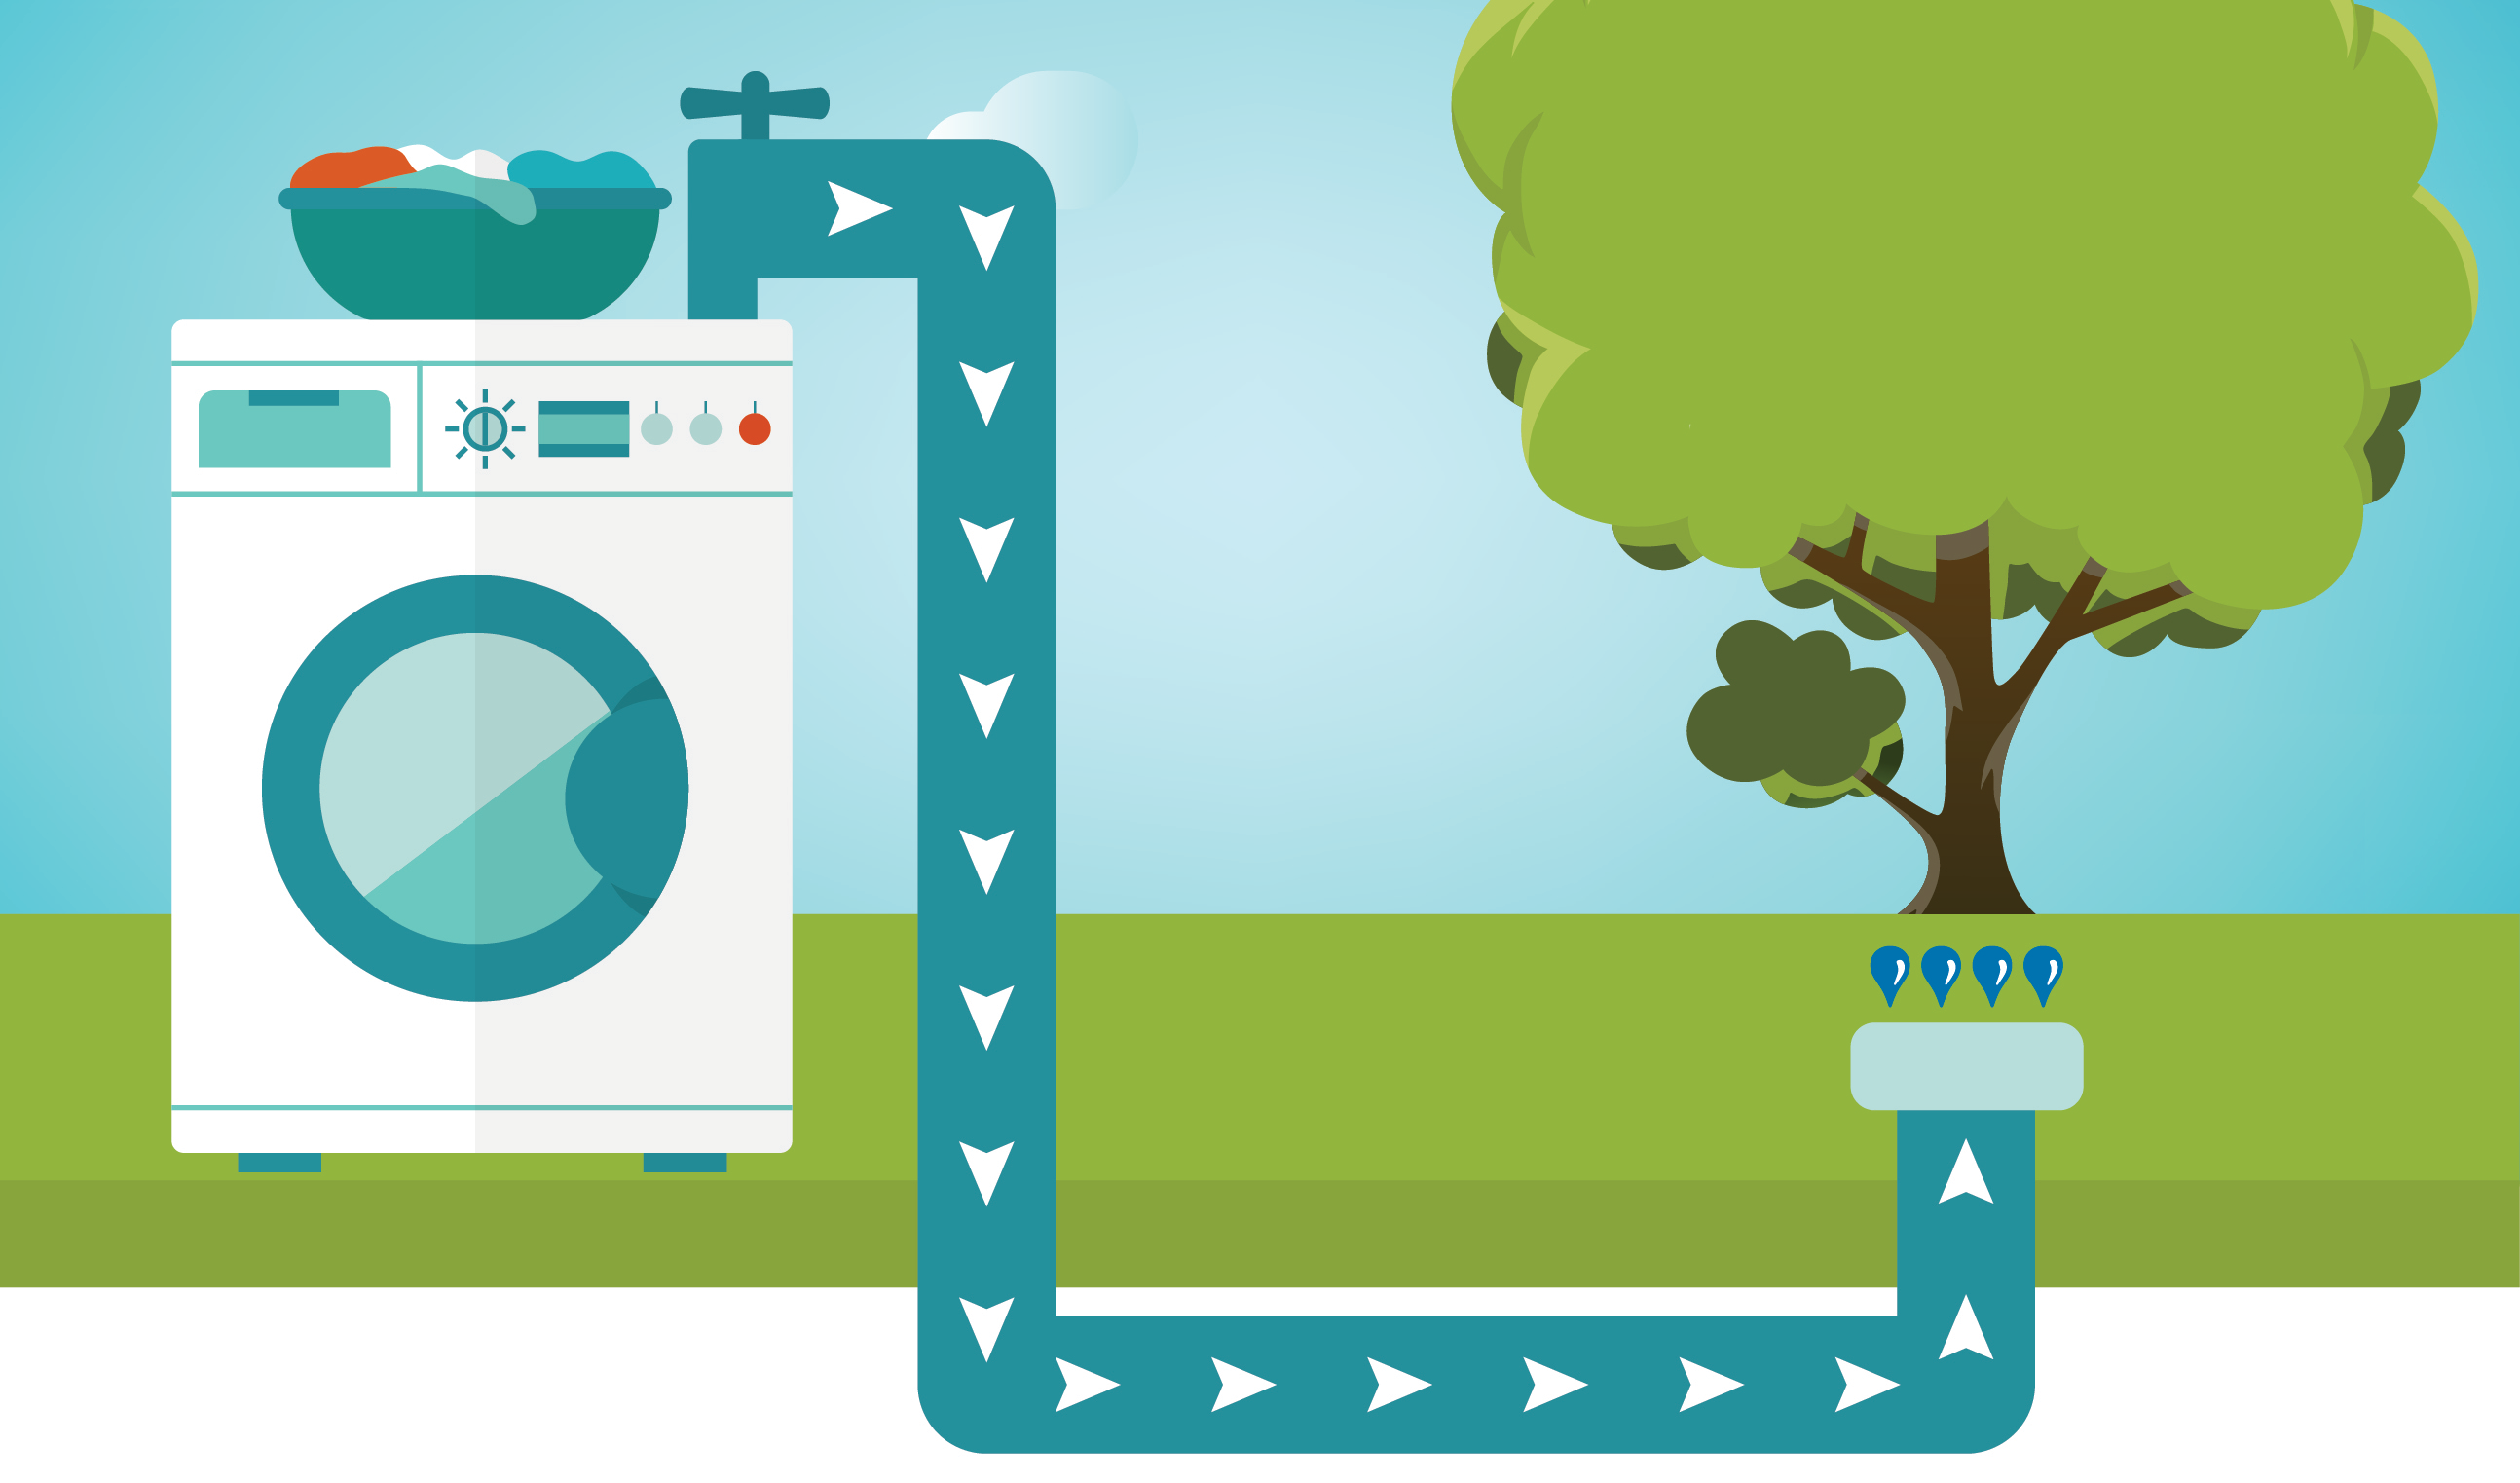 Greywater Action - For a sustainable water culture